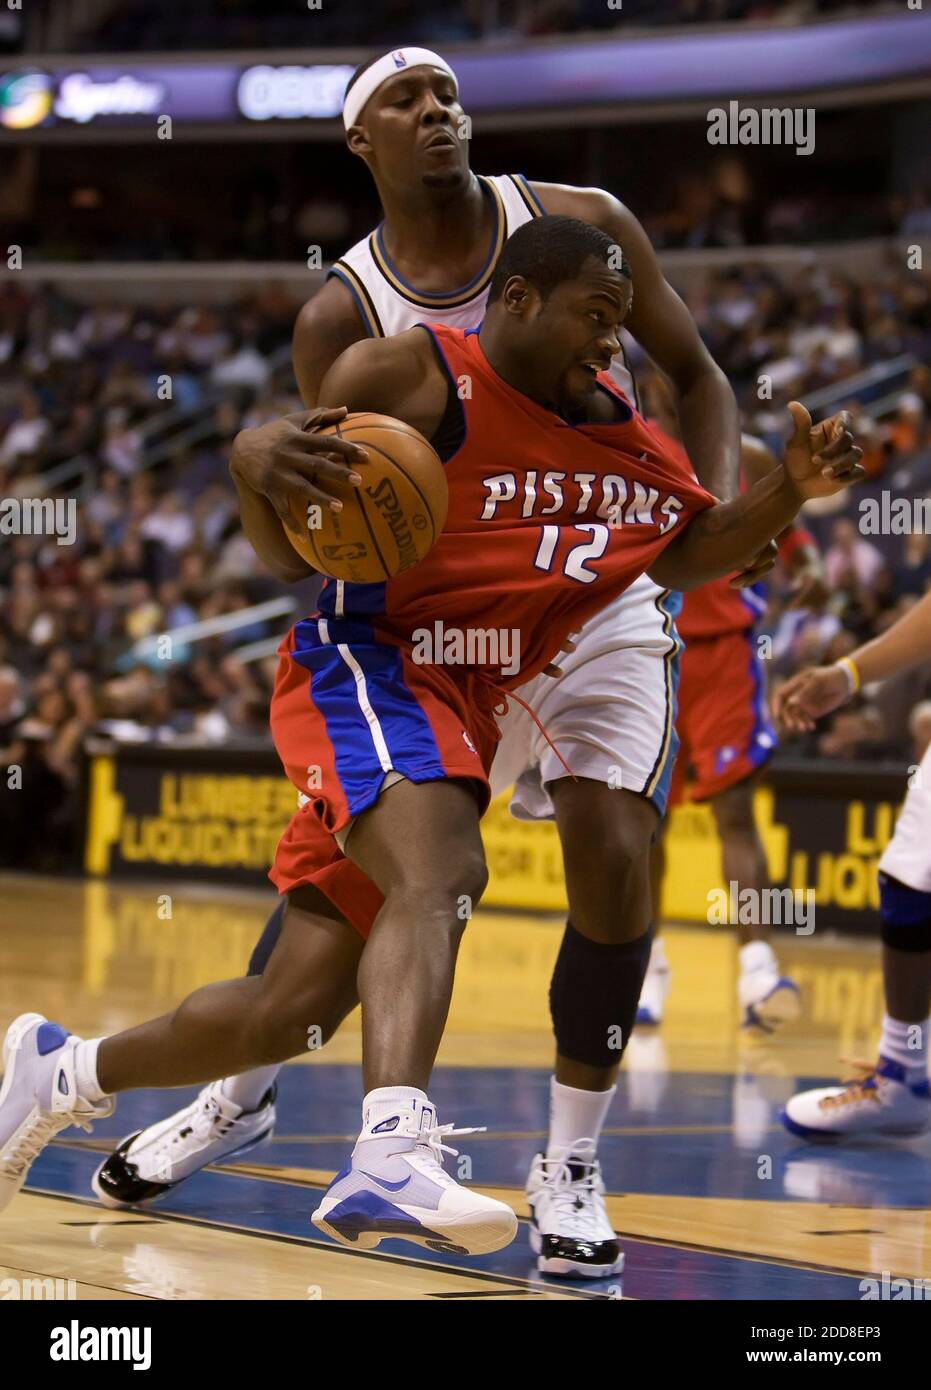 NO FILM, NO VIDEO, NO TV, NO DOCUMENTARY - Will Bynum (12) of the Detroit Pistons is fouled by Andray Blatche (32) of the Washington Wizards as he drives to the basket in the first half of their game at the Verizon Center in Washington, DC, USA on December 9, 2008. Washington Wizards won 107-94. Photo by George Bridges/MCT/Cameleon/ABACAPRESS.COM Stock Photo